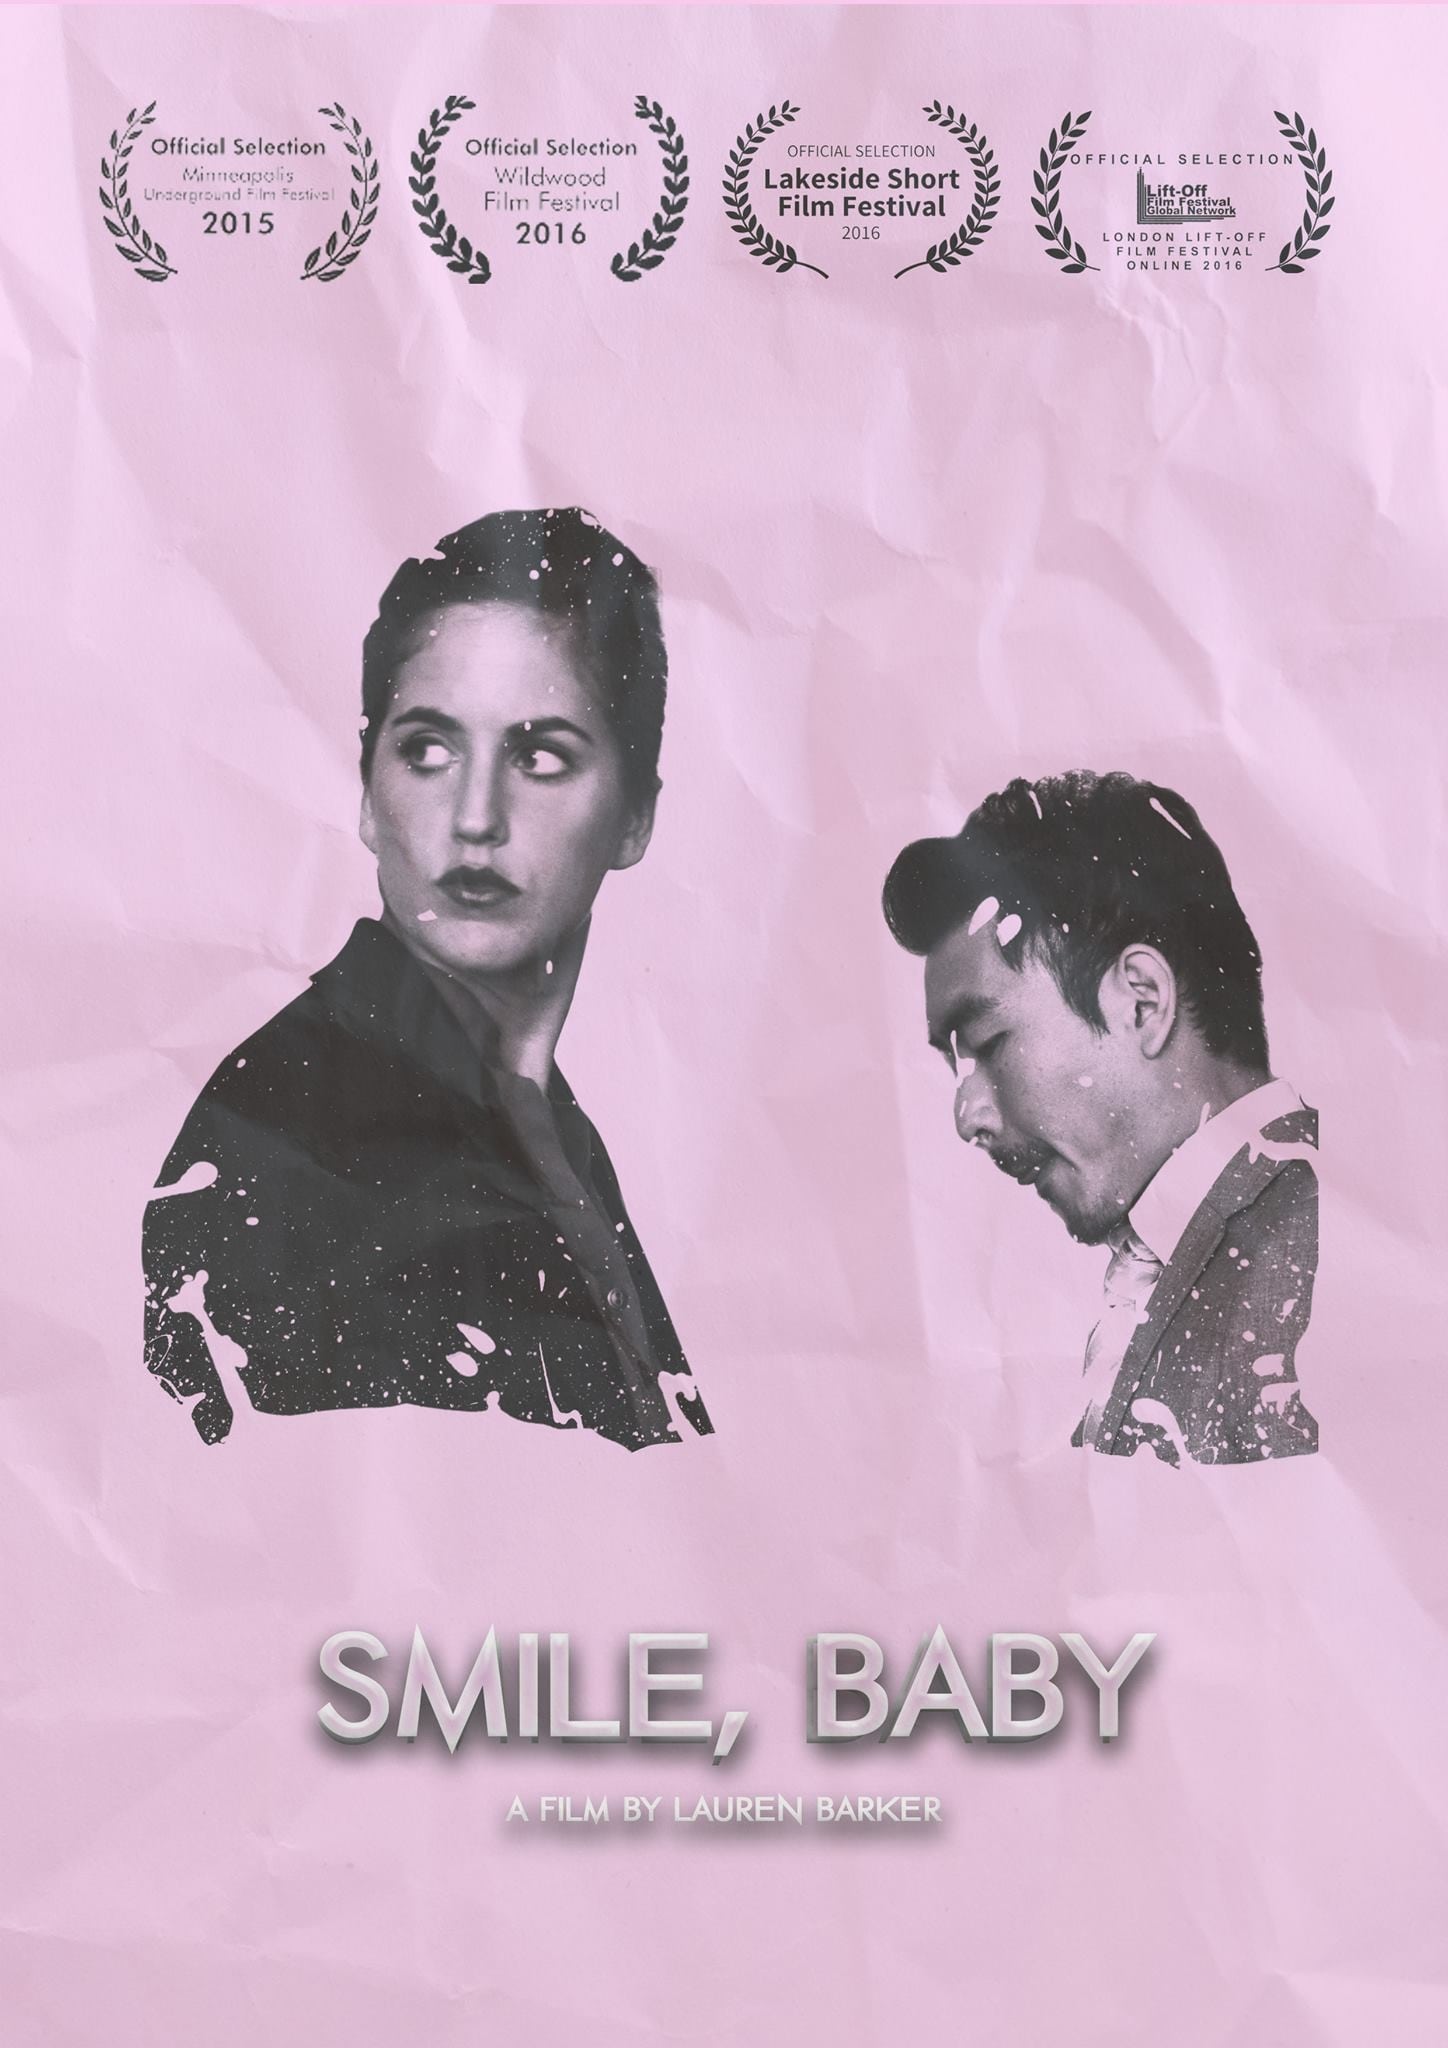 Smile, Baby